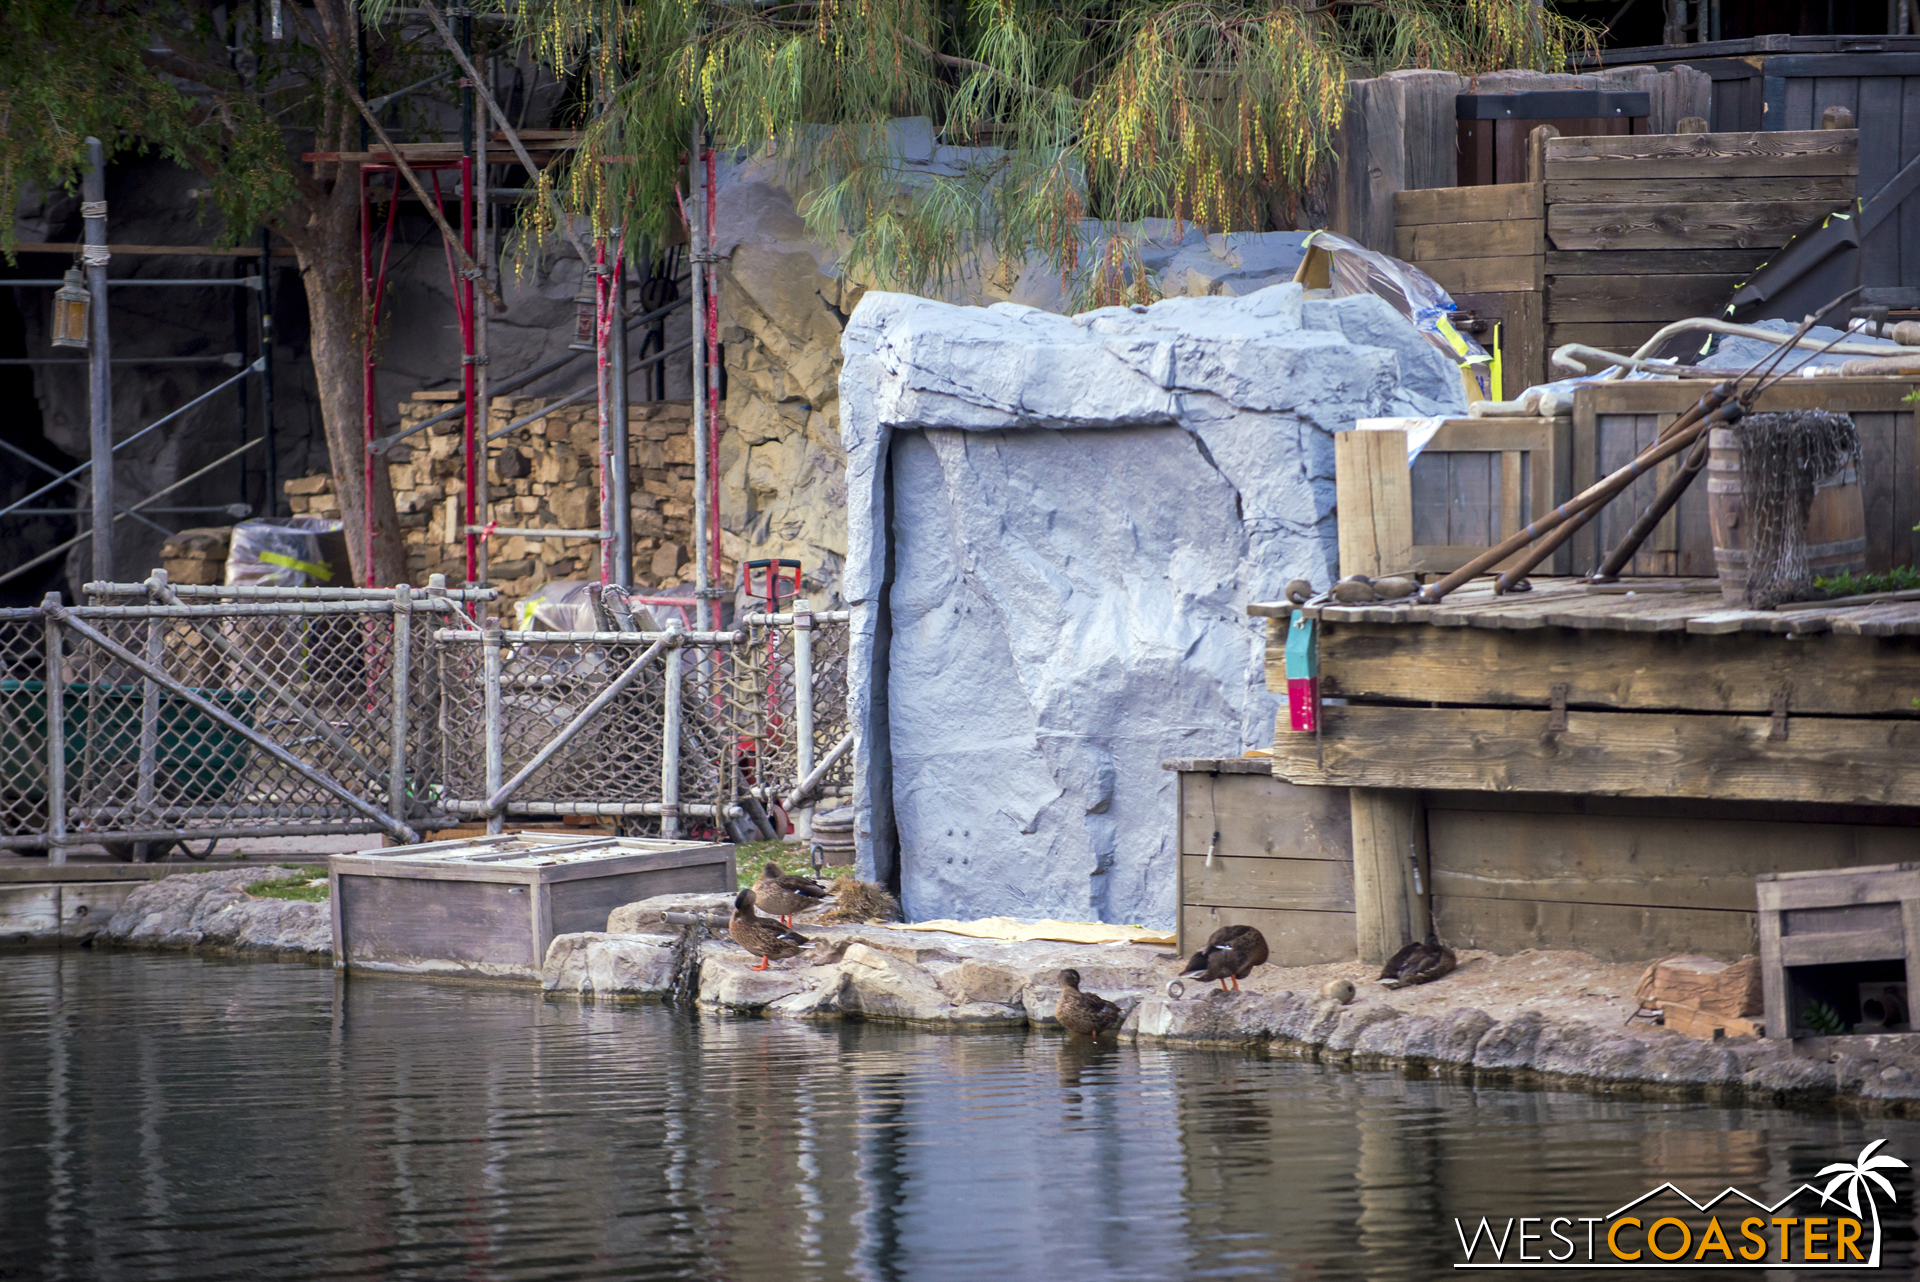  As you can see, they really hide equipment and items for FANTASMIC! 